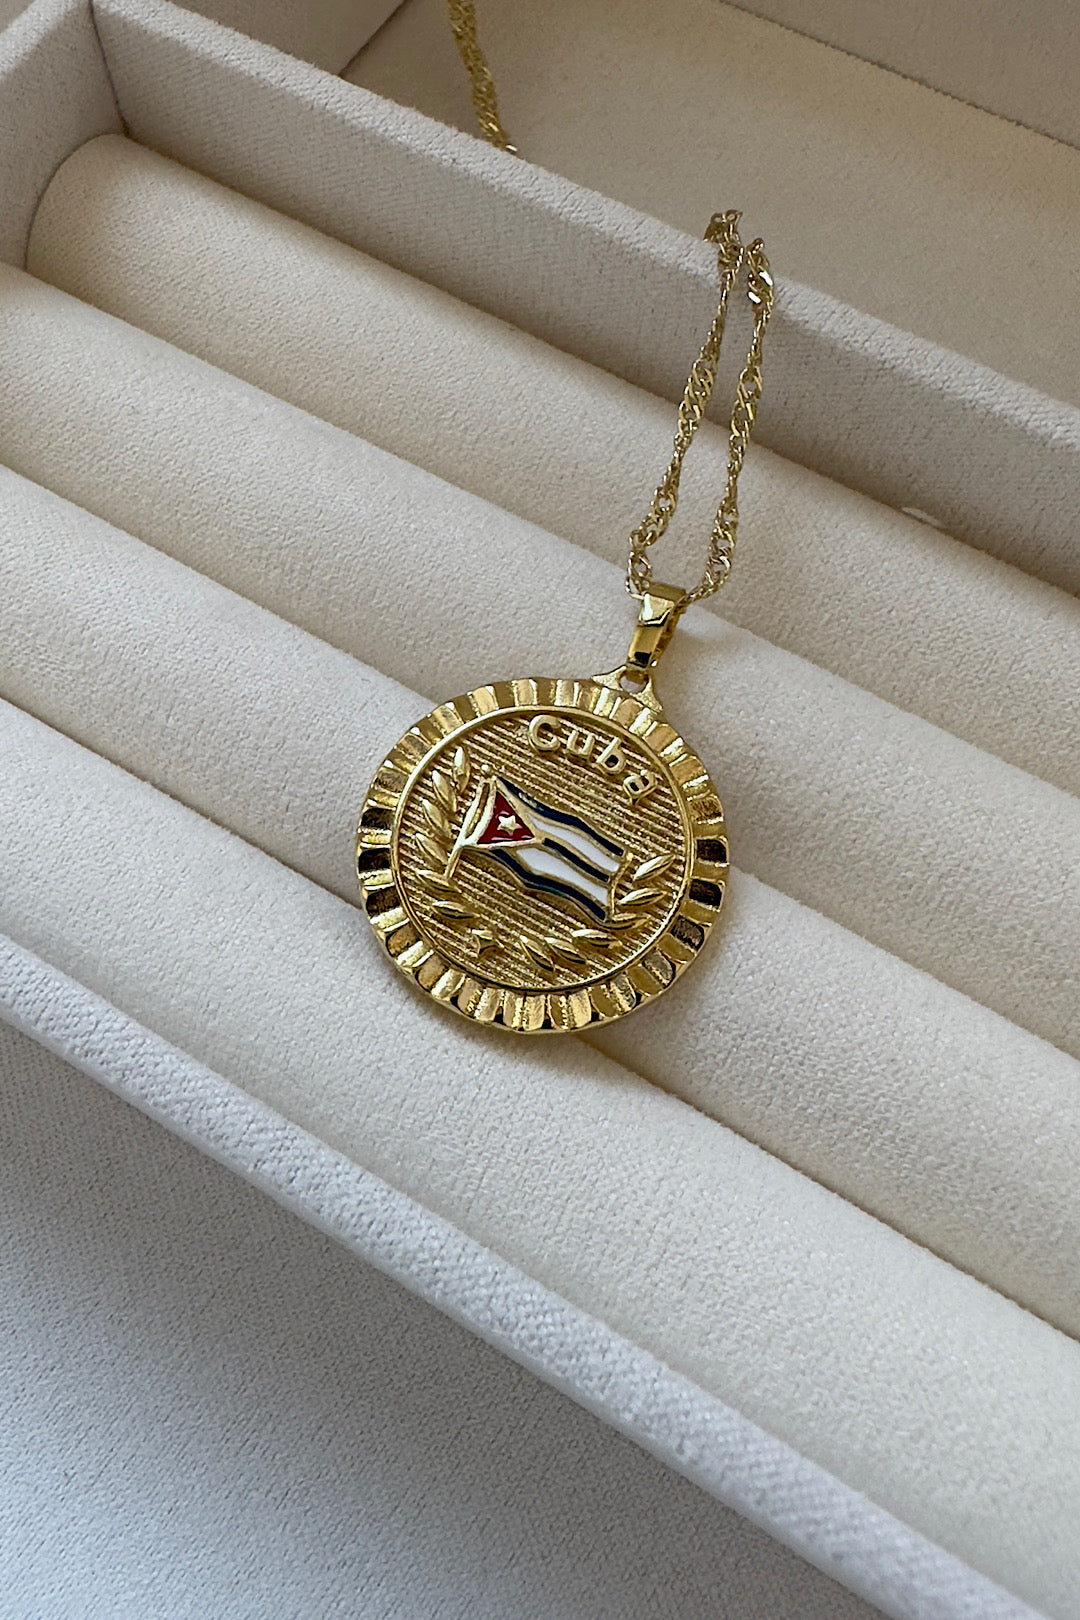 Cuba Coat of Arms Gold Necklace 